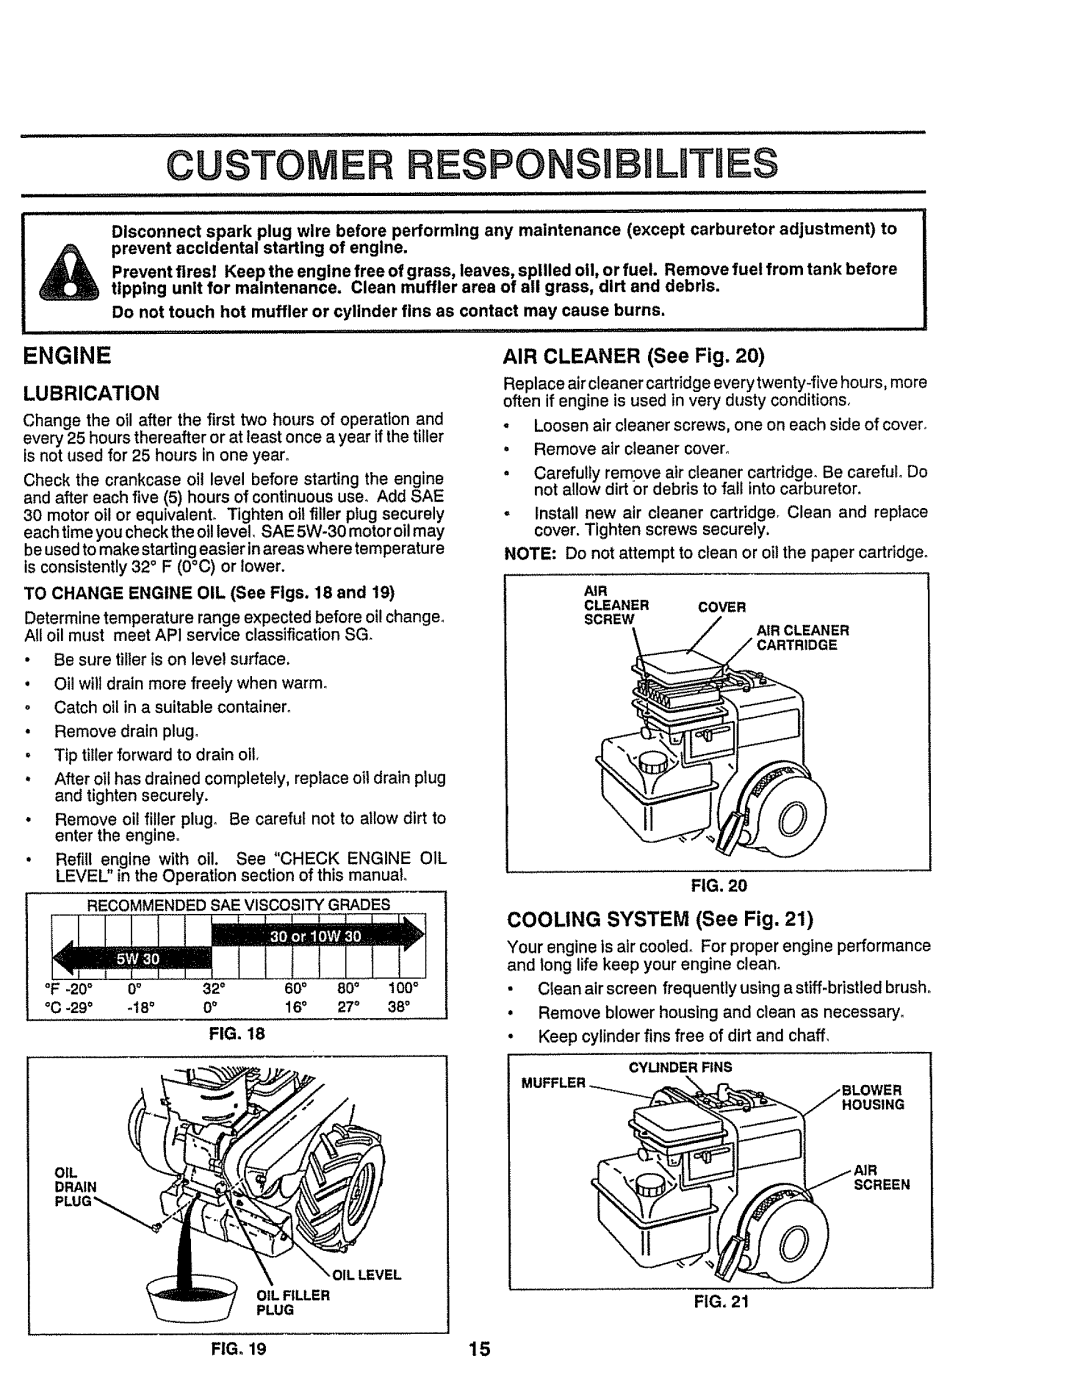 Craftsman 917-299751 owner manual ILmTMES, Engine, AIR CLEANER See Fig, COOLING SYSTEM See Fig, Lubrication 